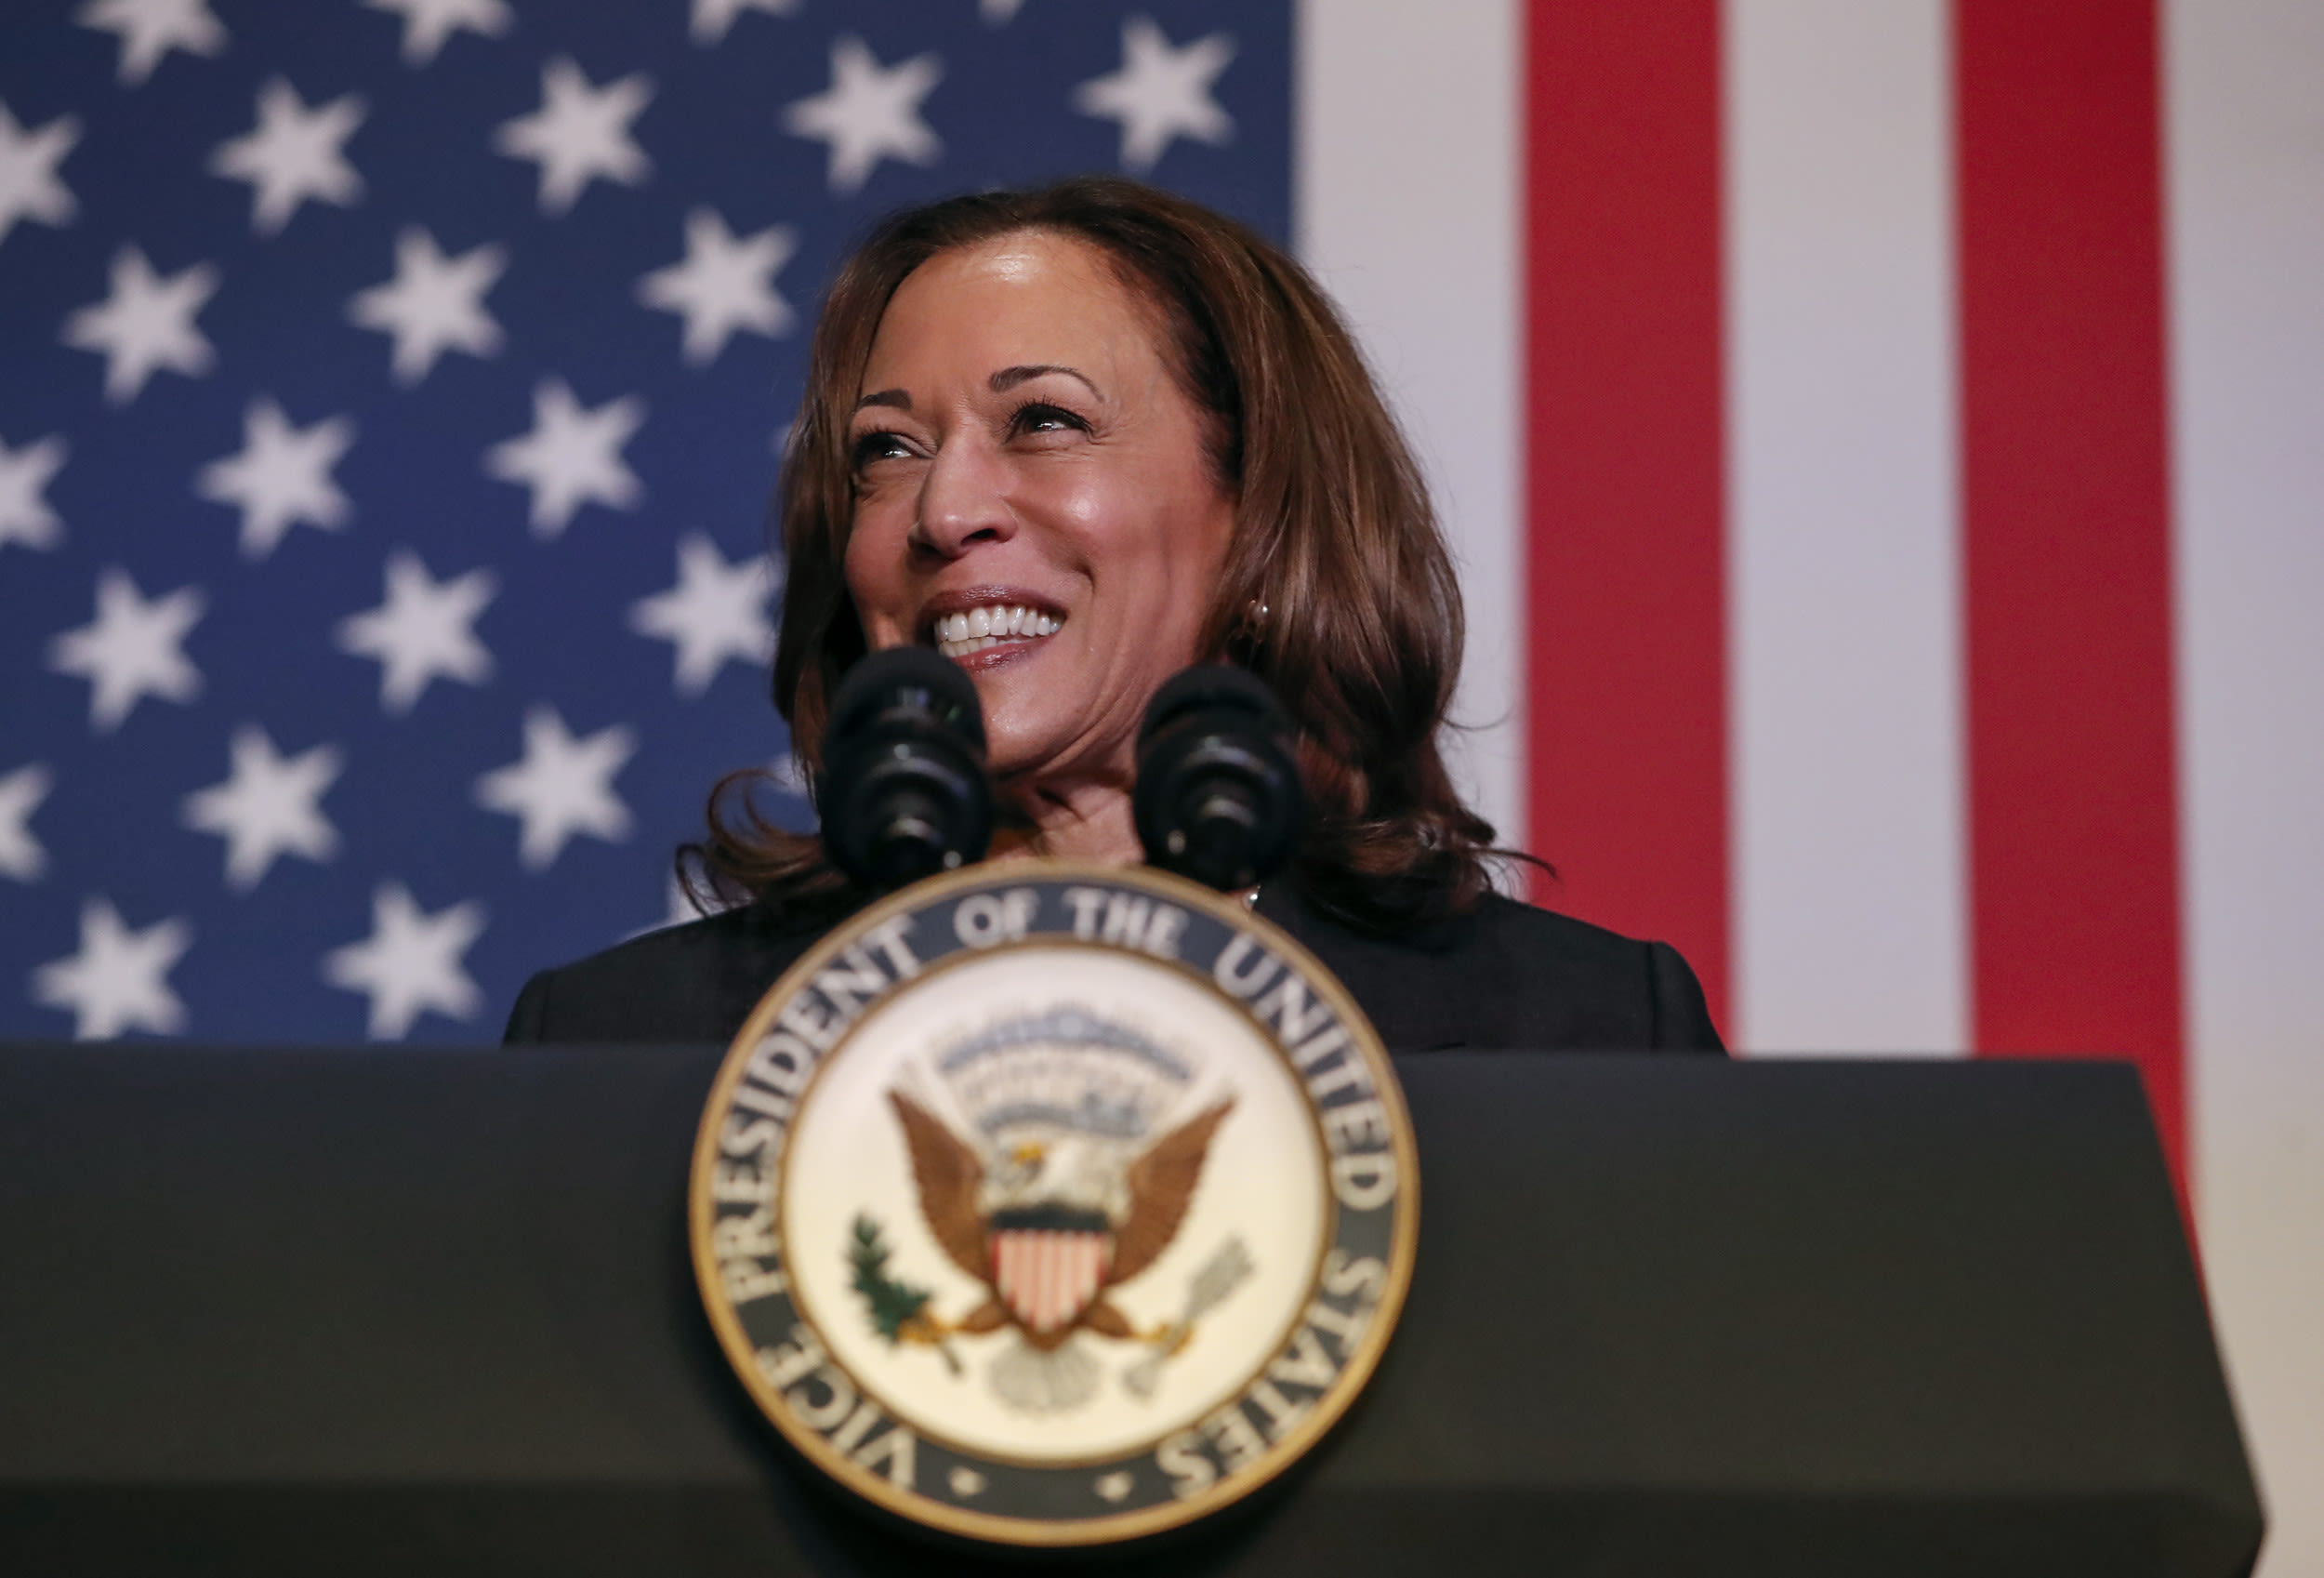 Kamala Harris most likely running mate, according to betting odds